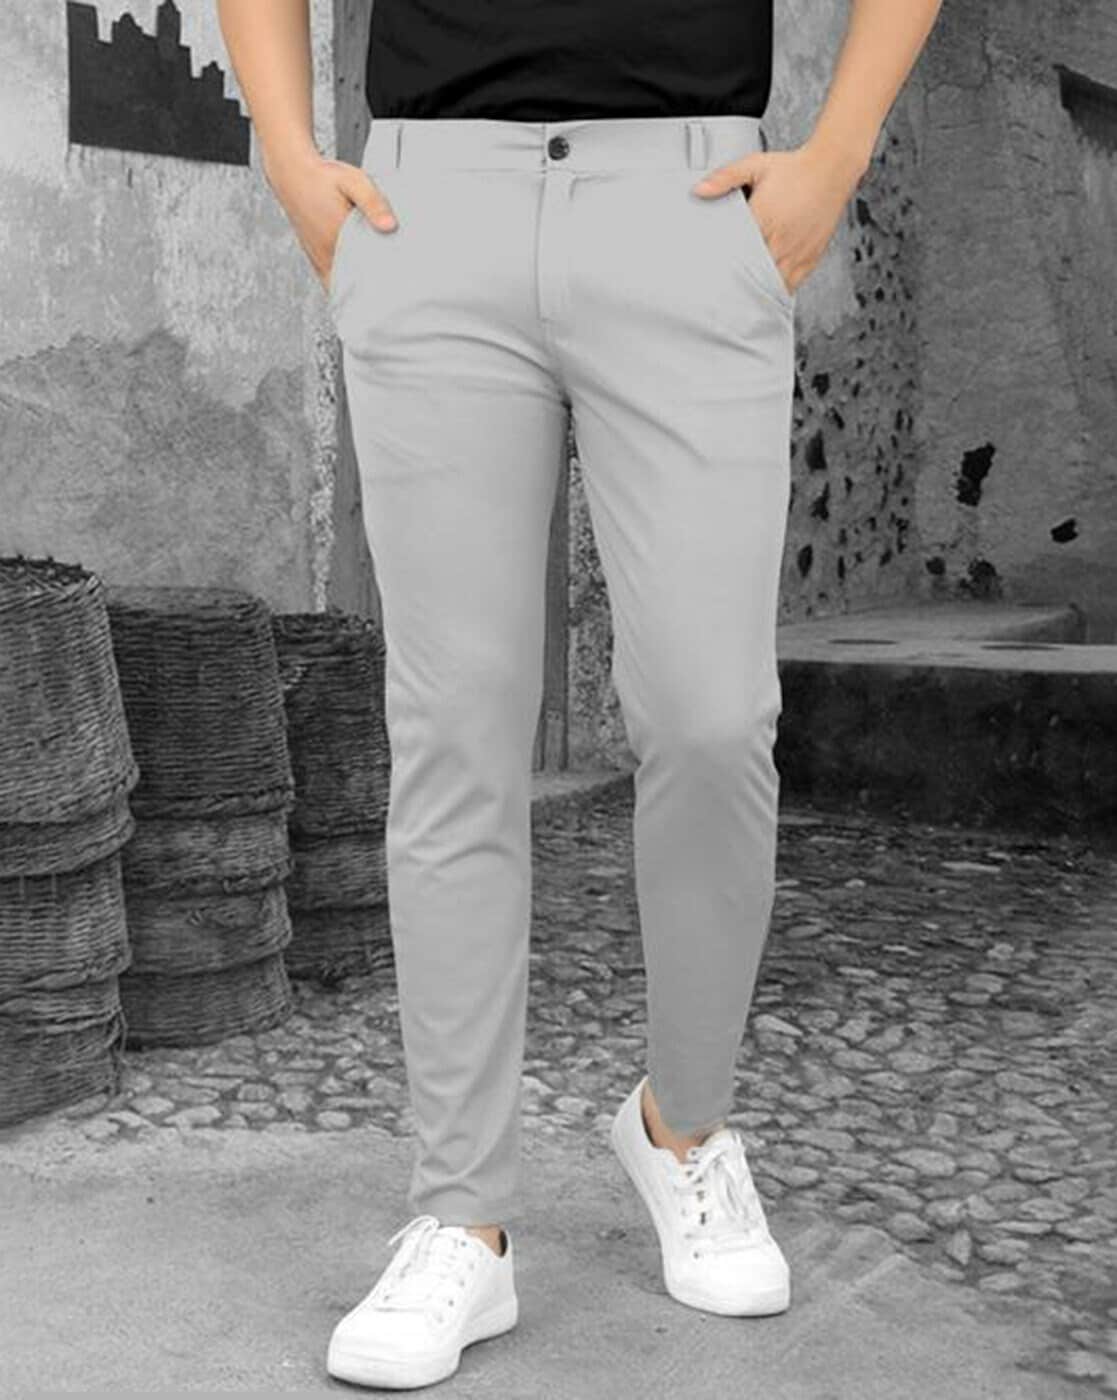 Sports Shoes Trousers Formal - Buy Sports Shoes Trousers Formal online in  India